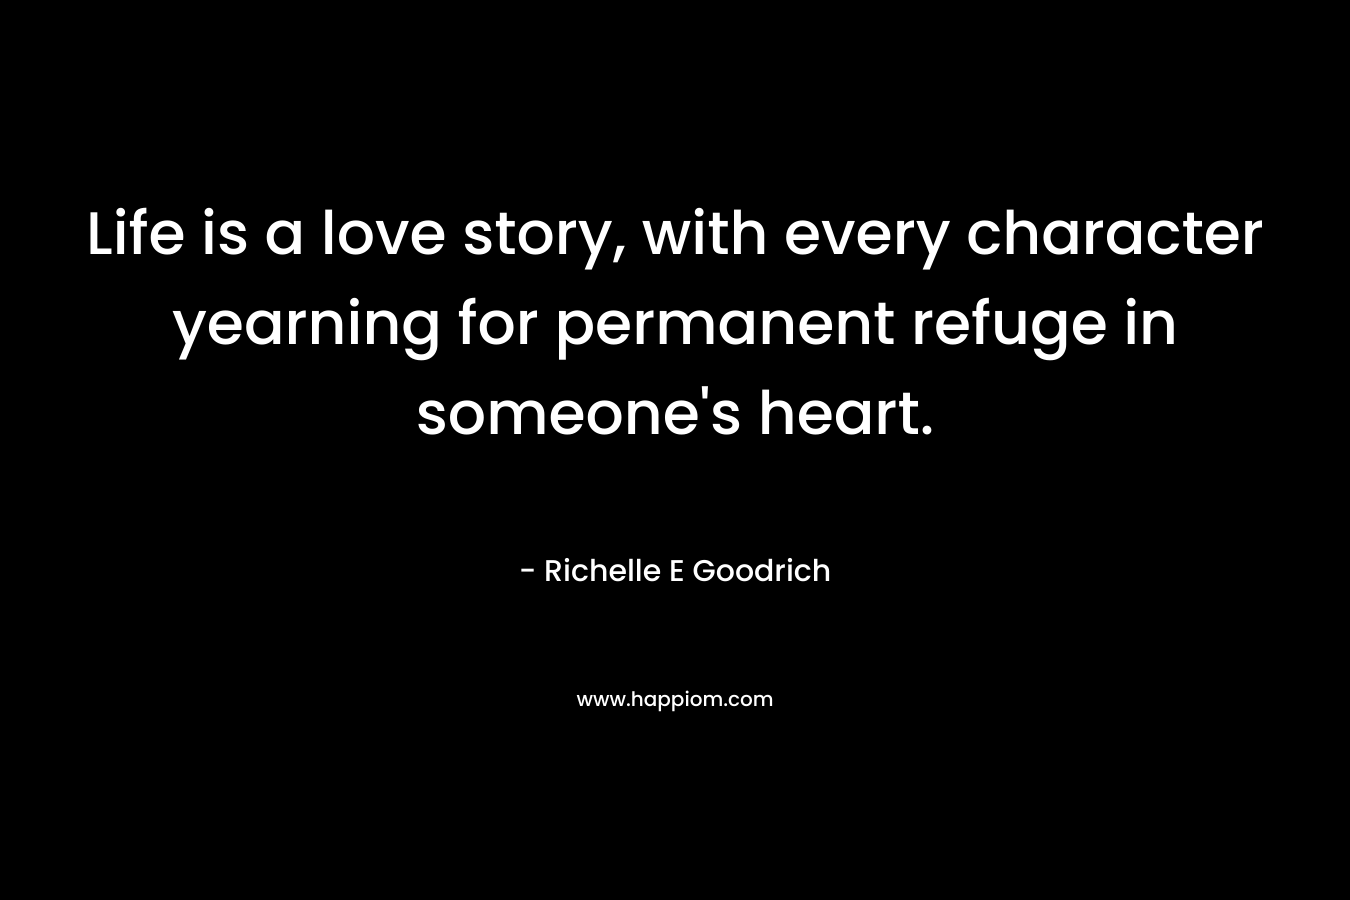 Life is a love story, with every character yearning for permanent refuge in someone's heart.